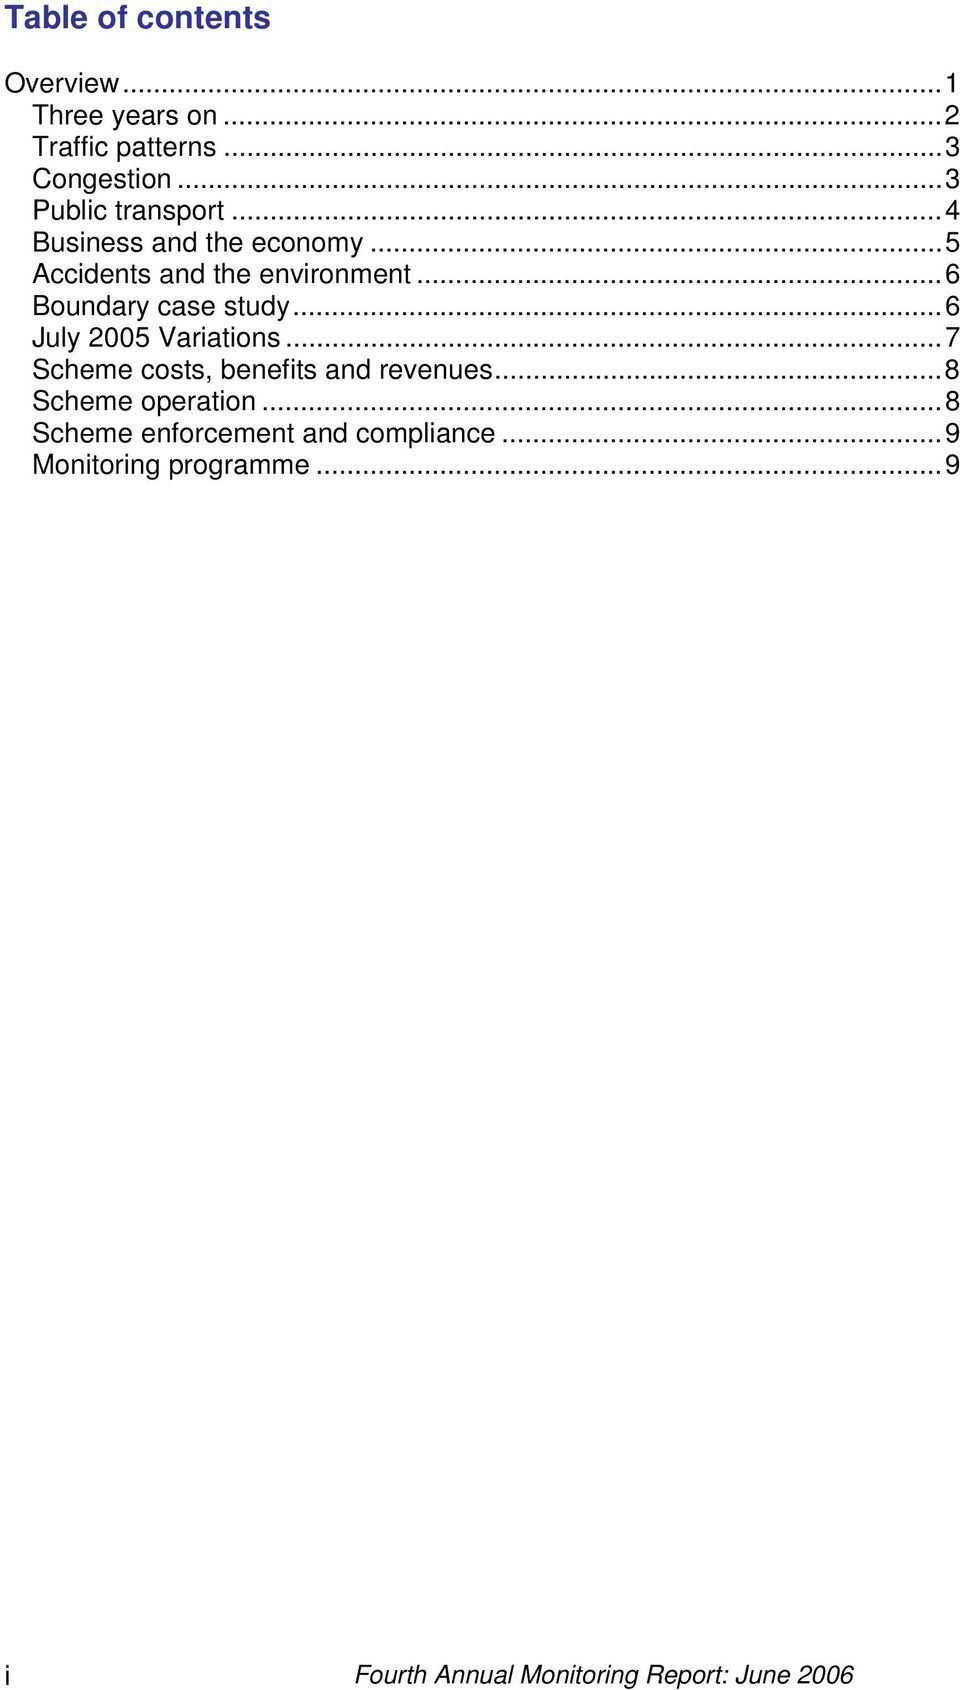 ..6 Boundary case study...6 July 2005 Variations...7 Scheme costs, benefits and revenues.